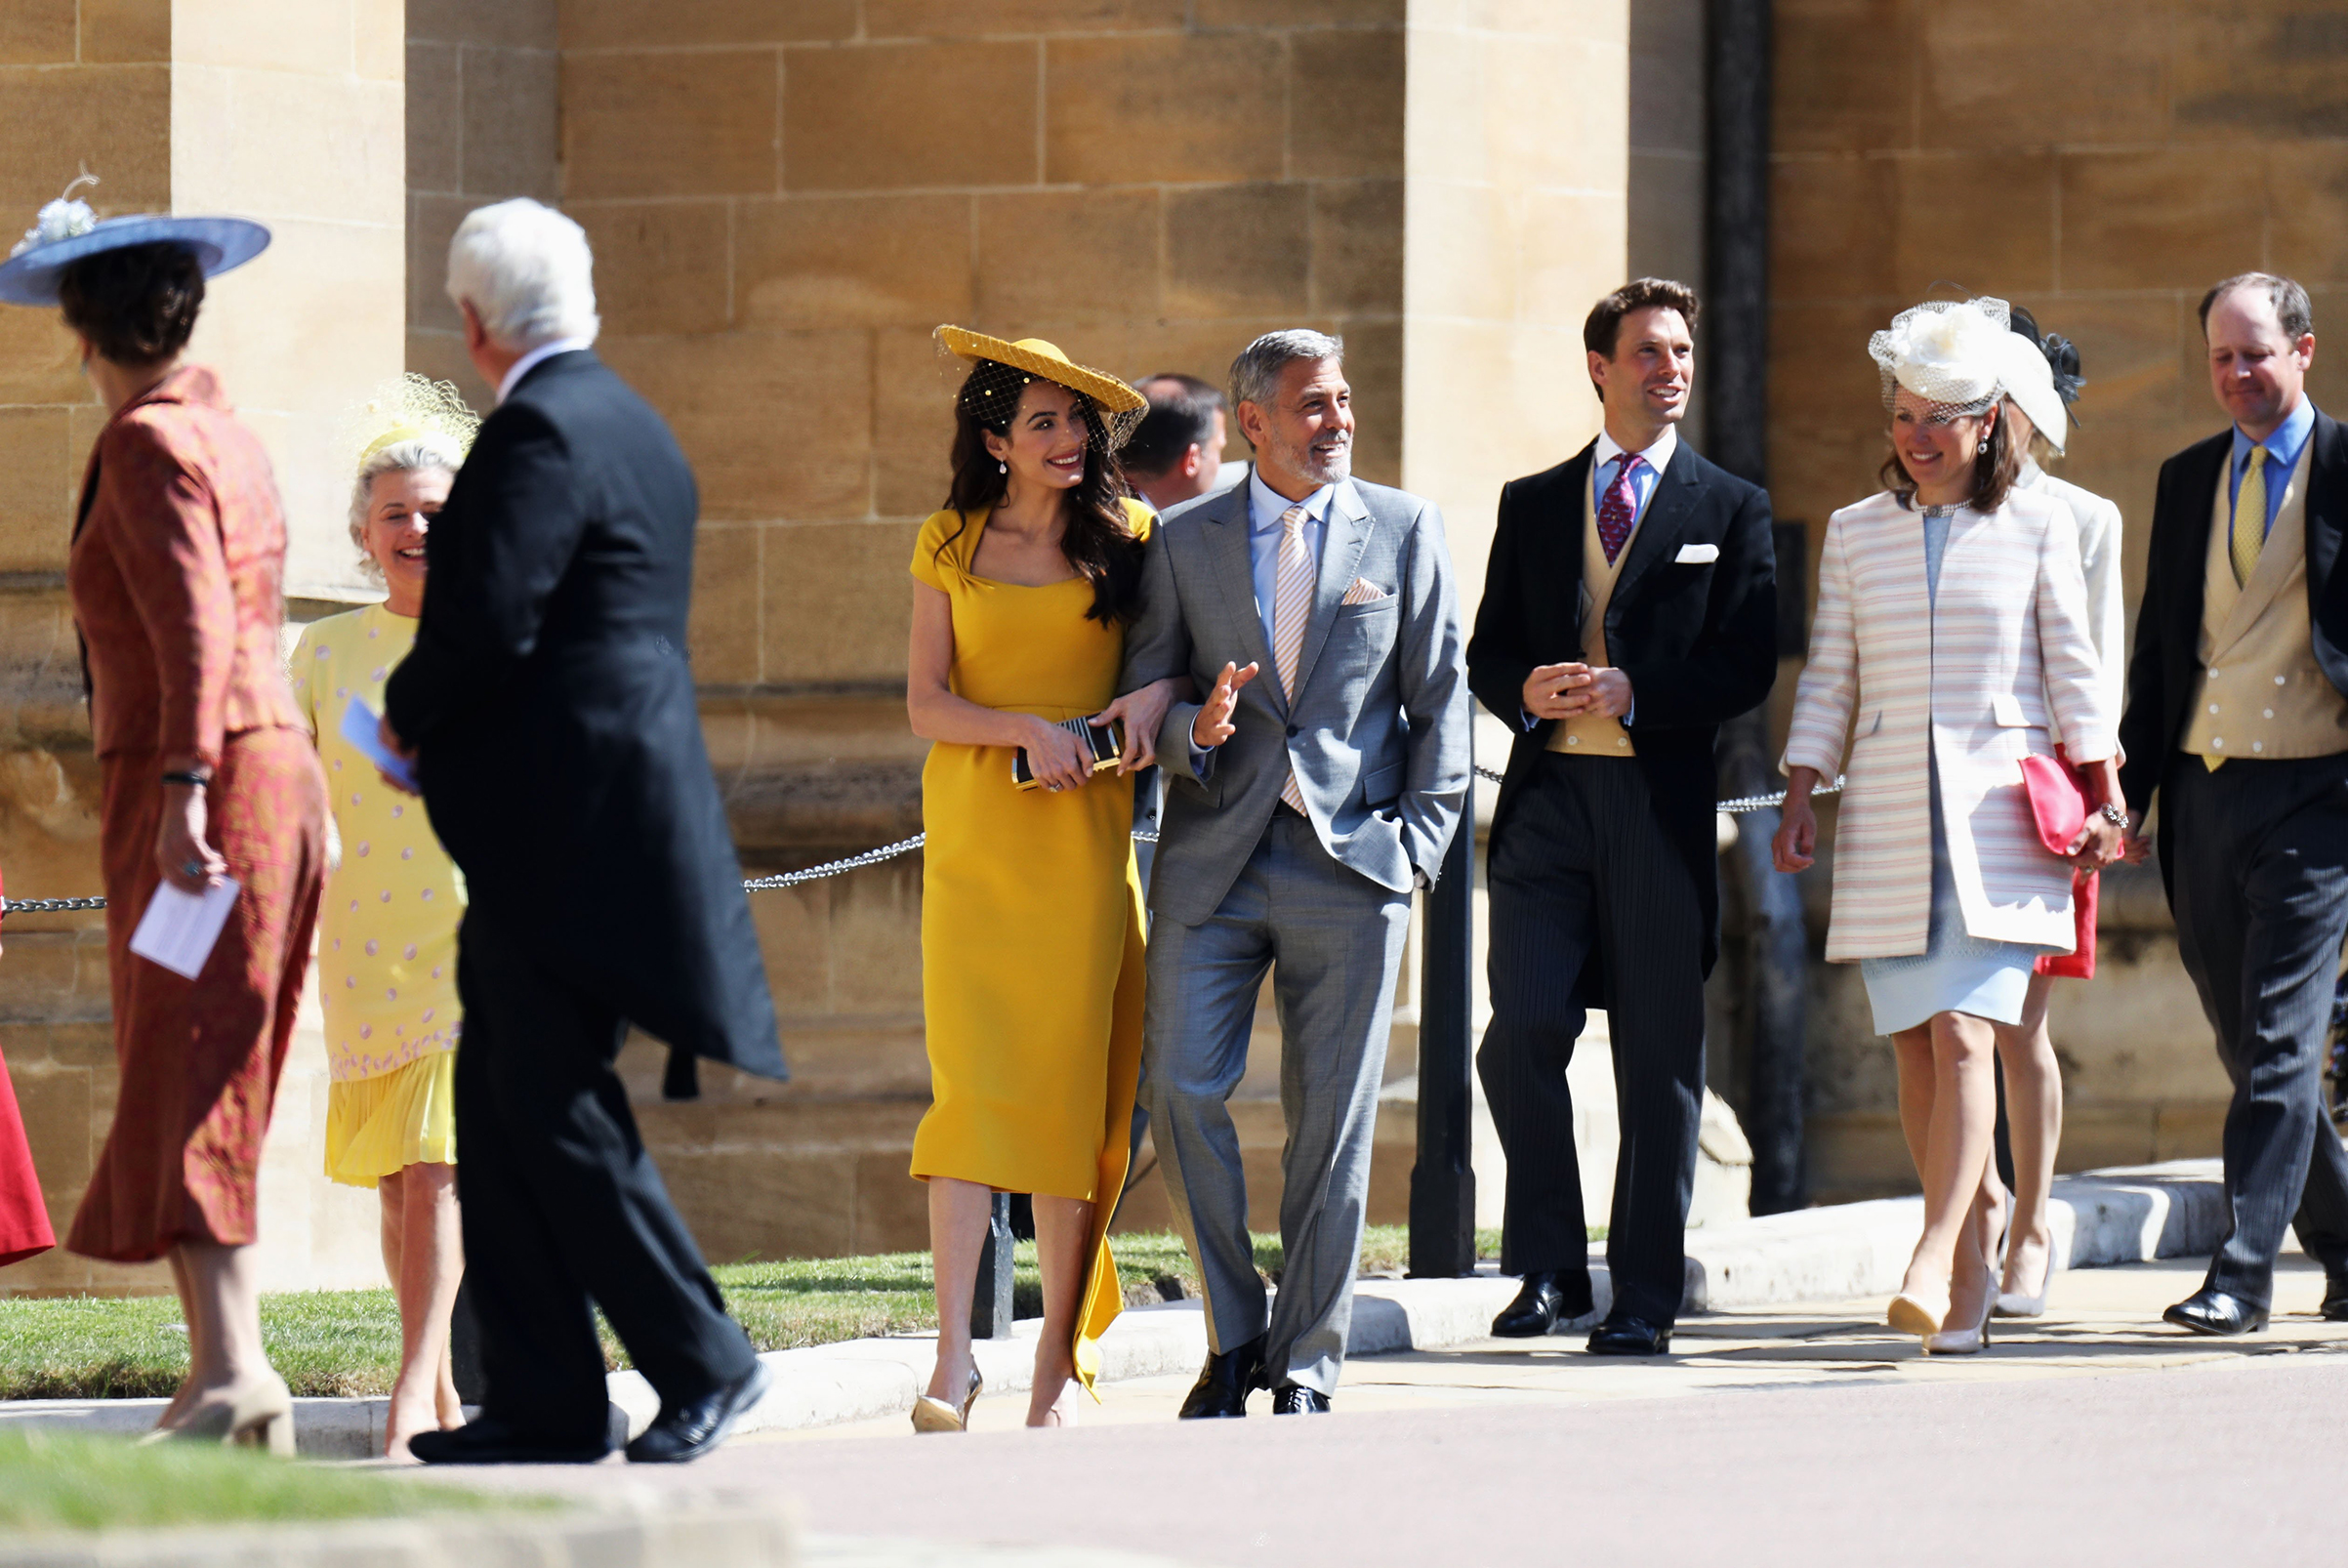 Amal Clooney and George Clooney arrive at the wedding of Prince Harry to Ms Meghan Markle at St George's Chapel, Windsor Castle on May 19, 2018 in Windsor, England. (Chris Jackson—Getty Images)